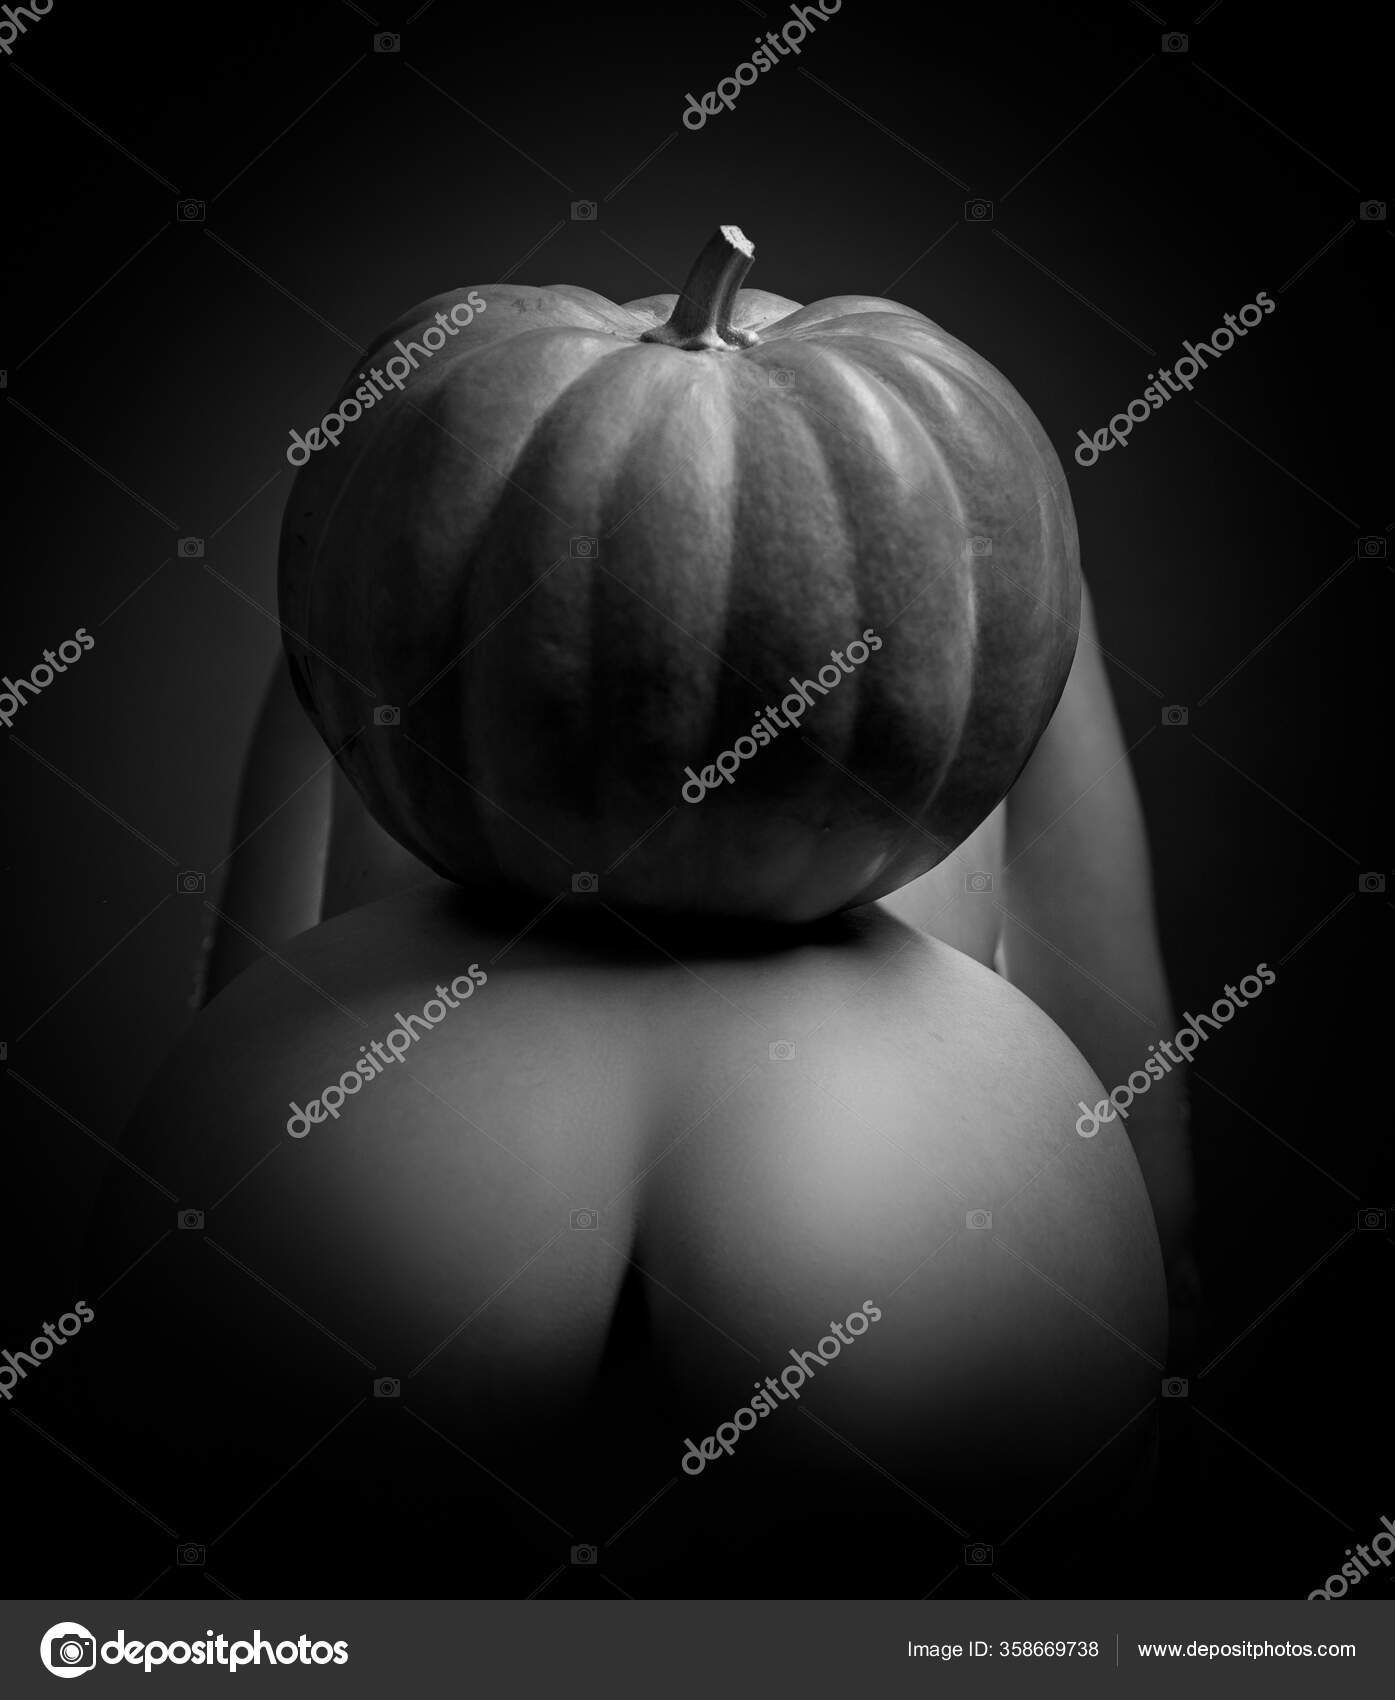 Female with sexy ass posing. Pose for sex and kamasutra concept. Love position sensual woman. Anal sex and female orgasm. Sale on sex shop. Sexual costume picture